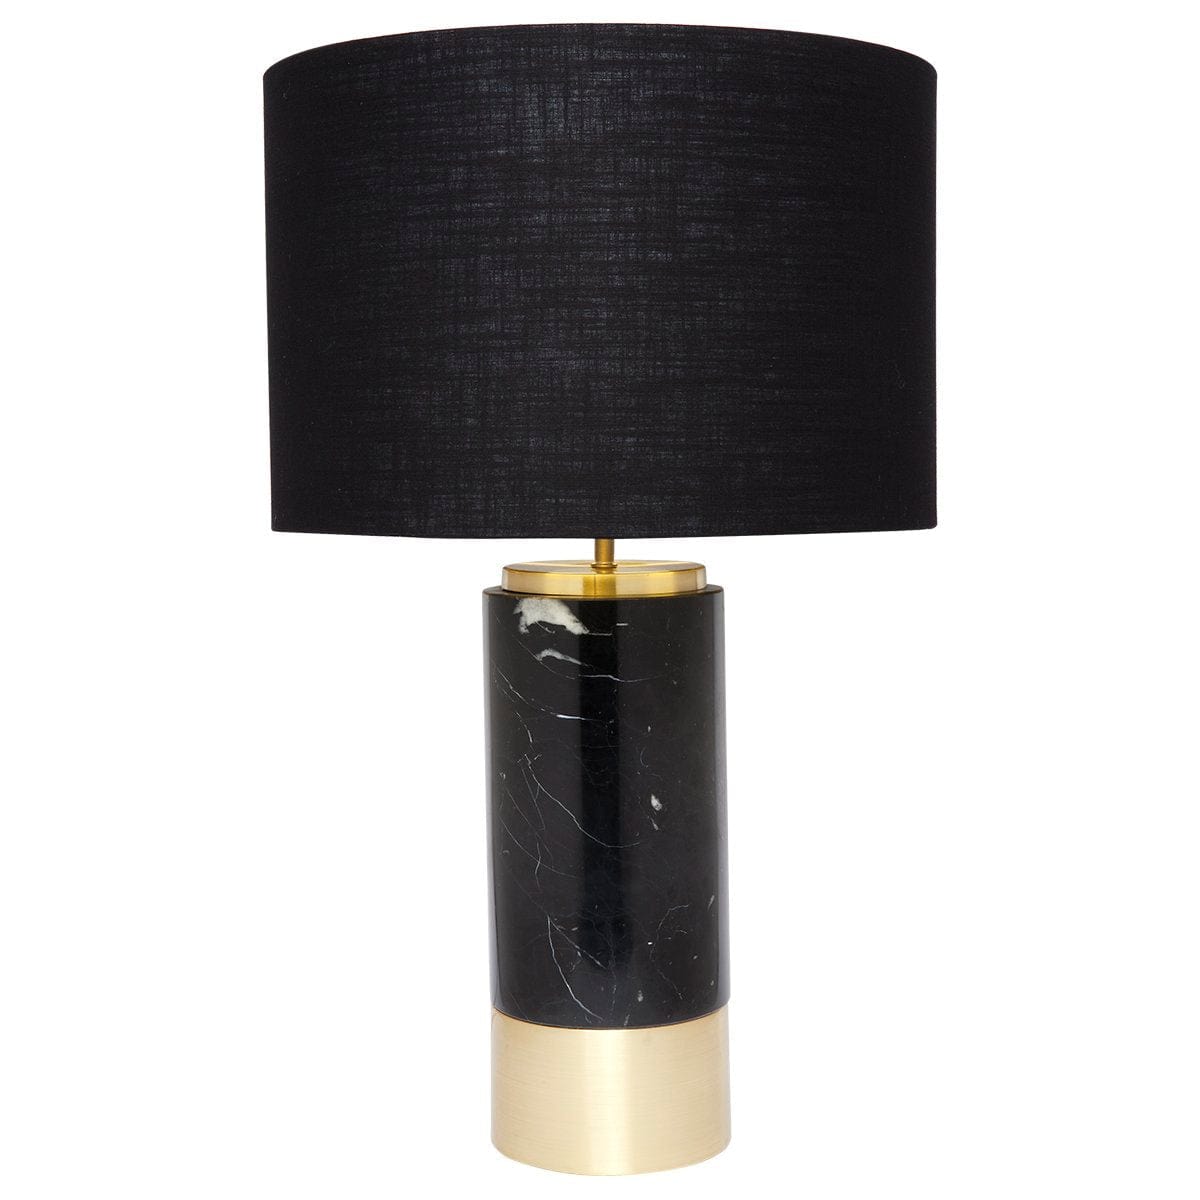 CAFE LIGHTING & LIVING Table Lamp Paola Marble Table Lamp - Black w Black Shade B11651